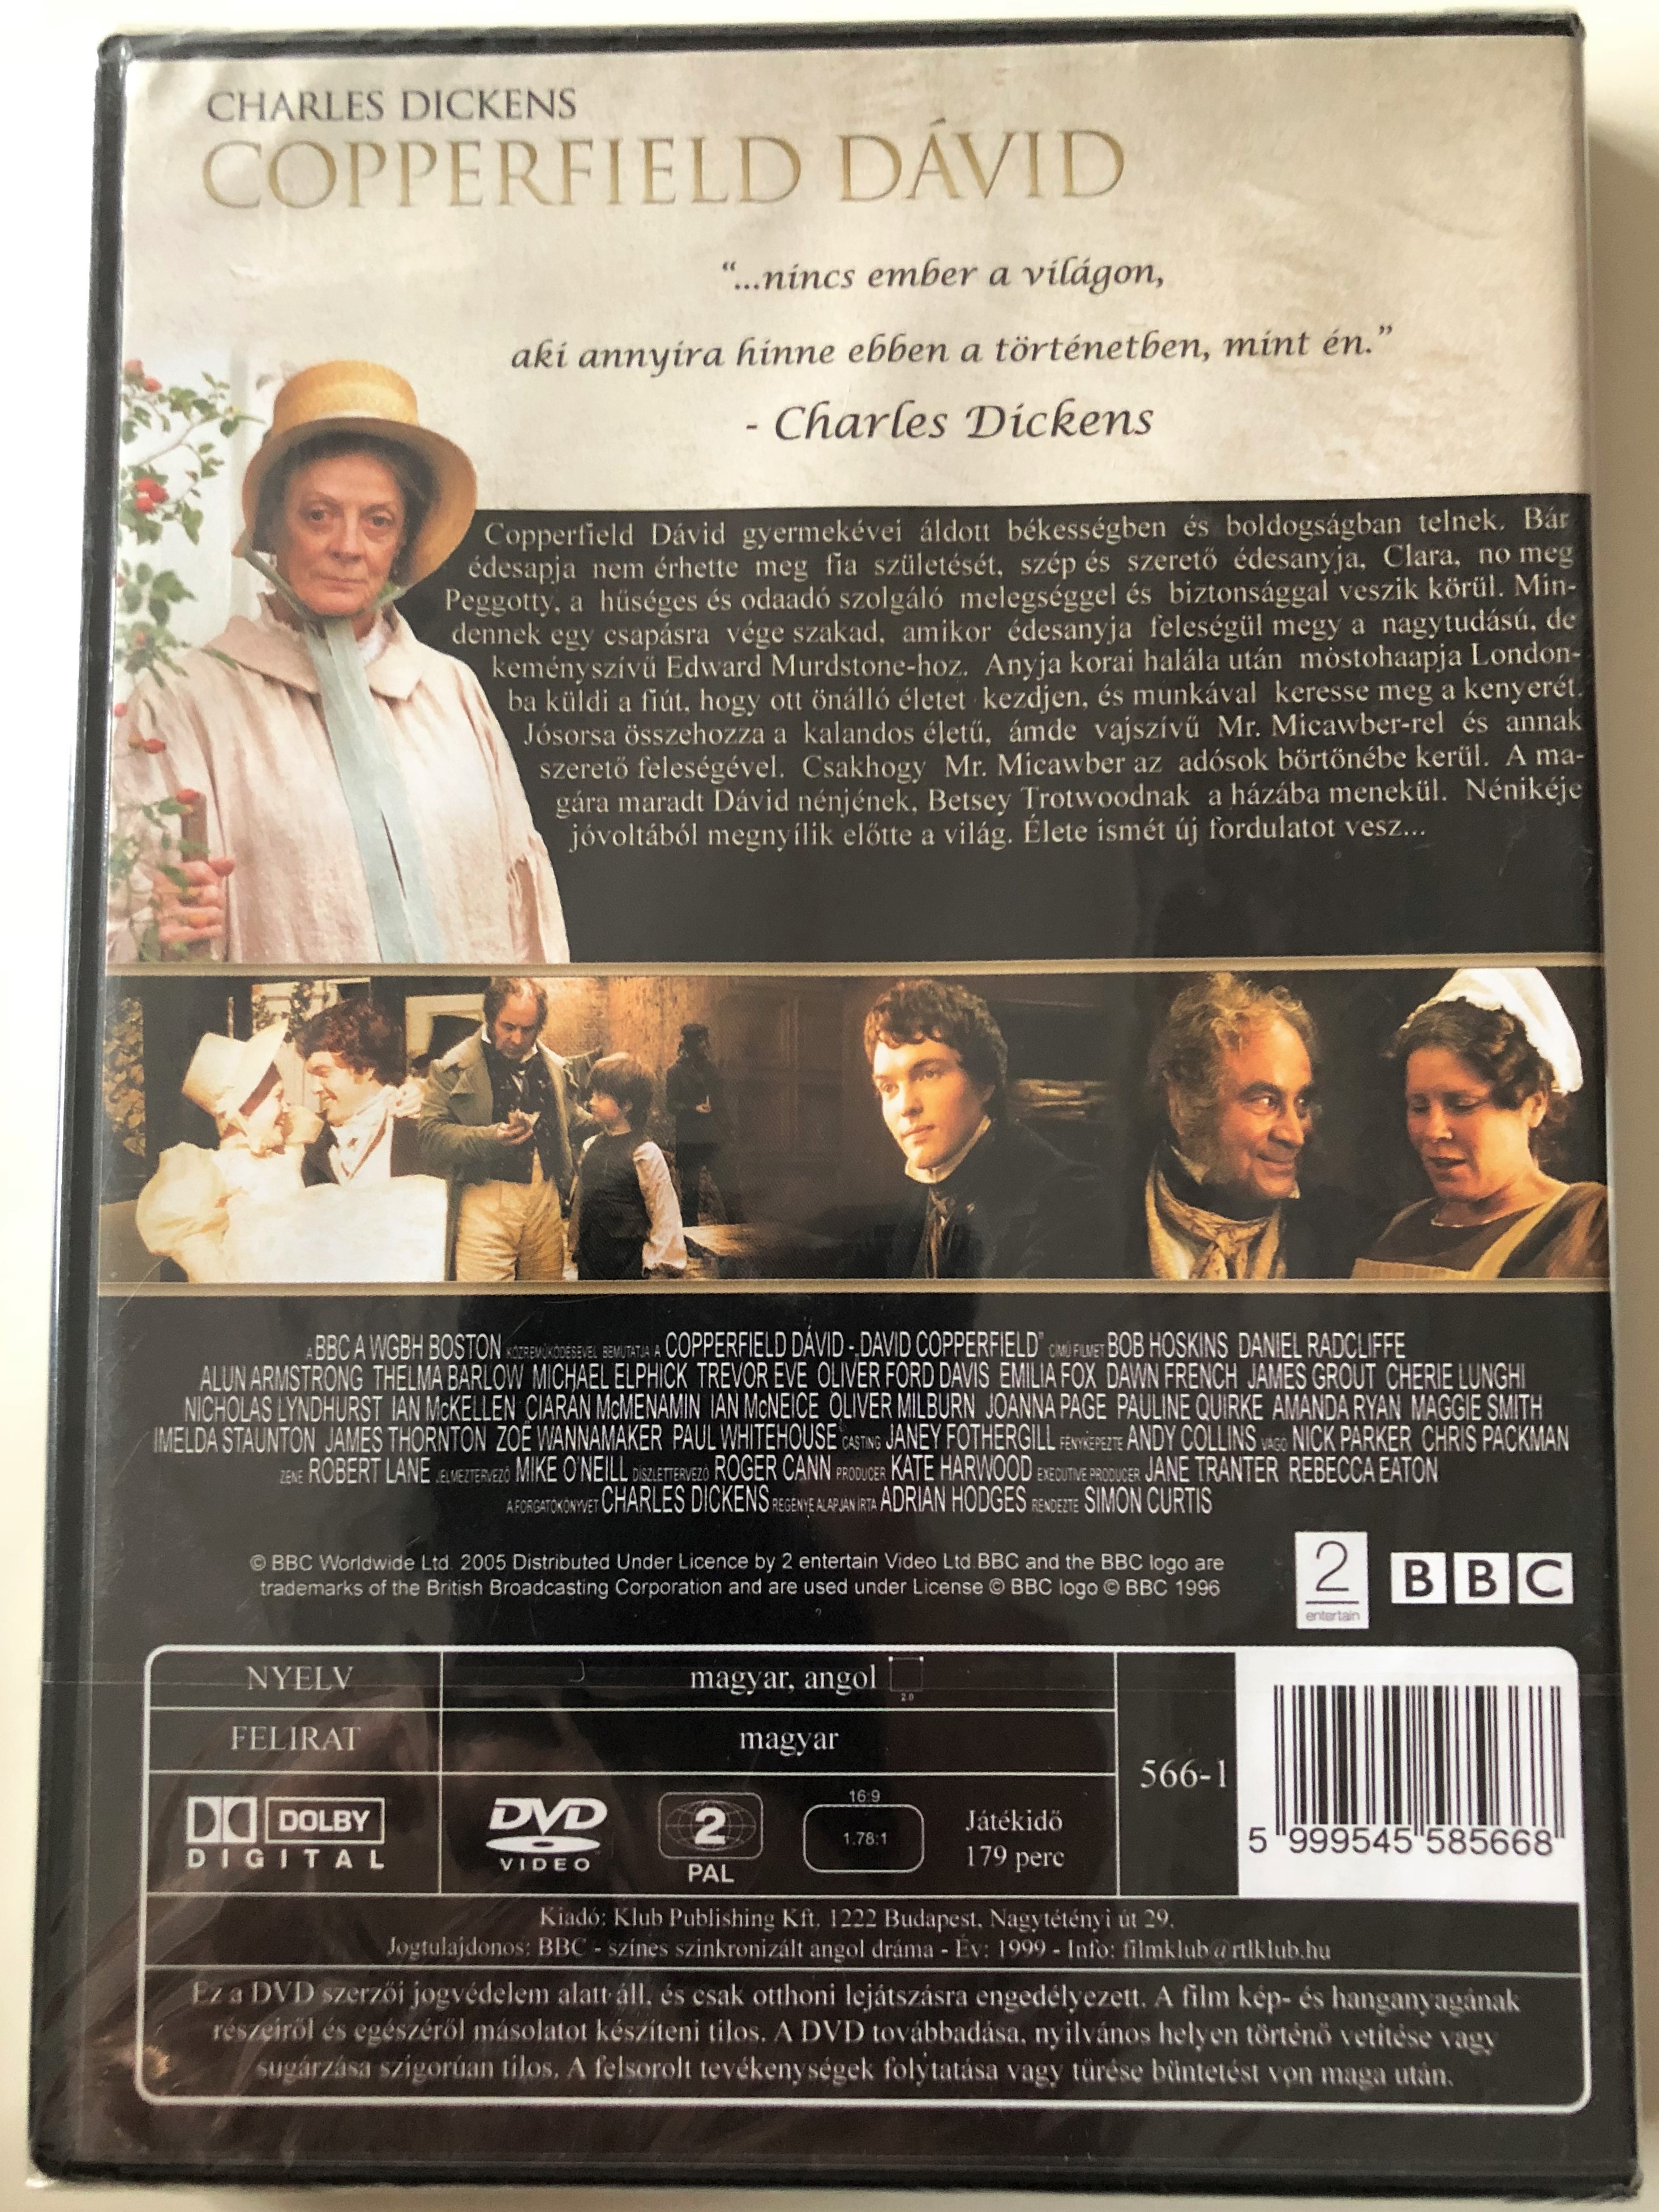 BBC Charles Dikens - David Copperfield DVD 1999 Copperfield Dávid /  Directed by Simon Curtis / Starring: Bob Hoskins, Daniel Radcliffe - Bible  in My Language